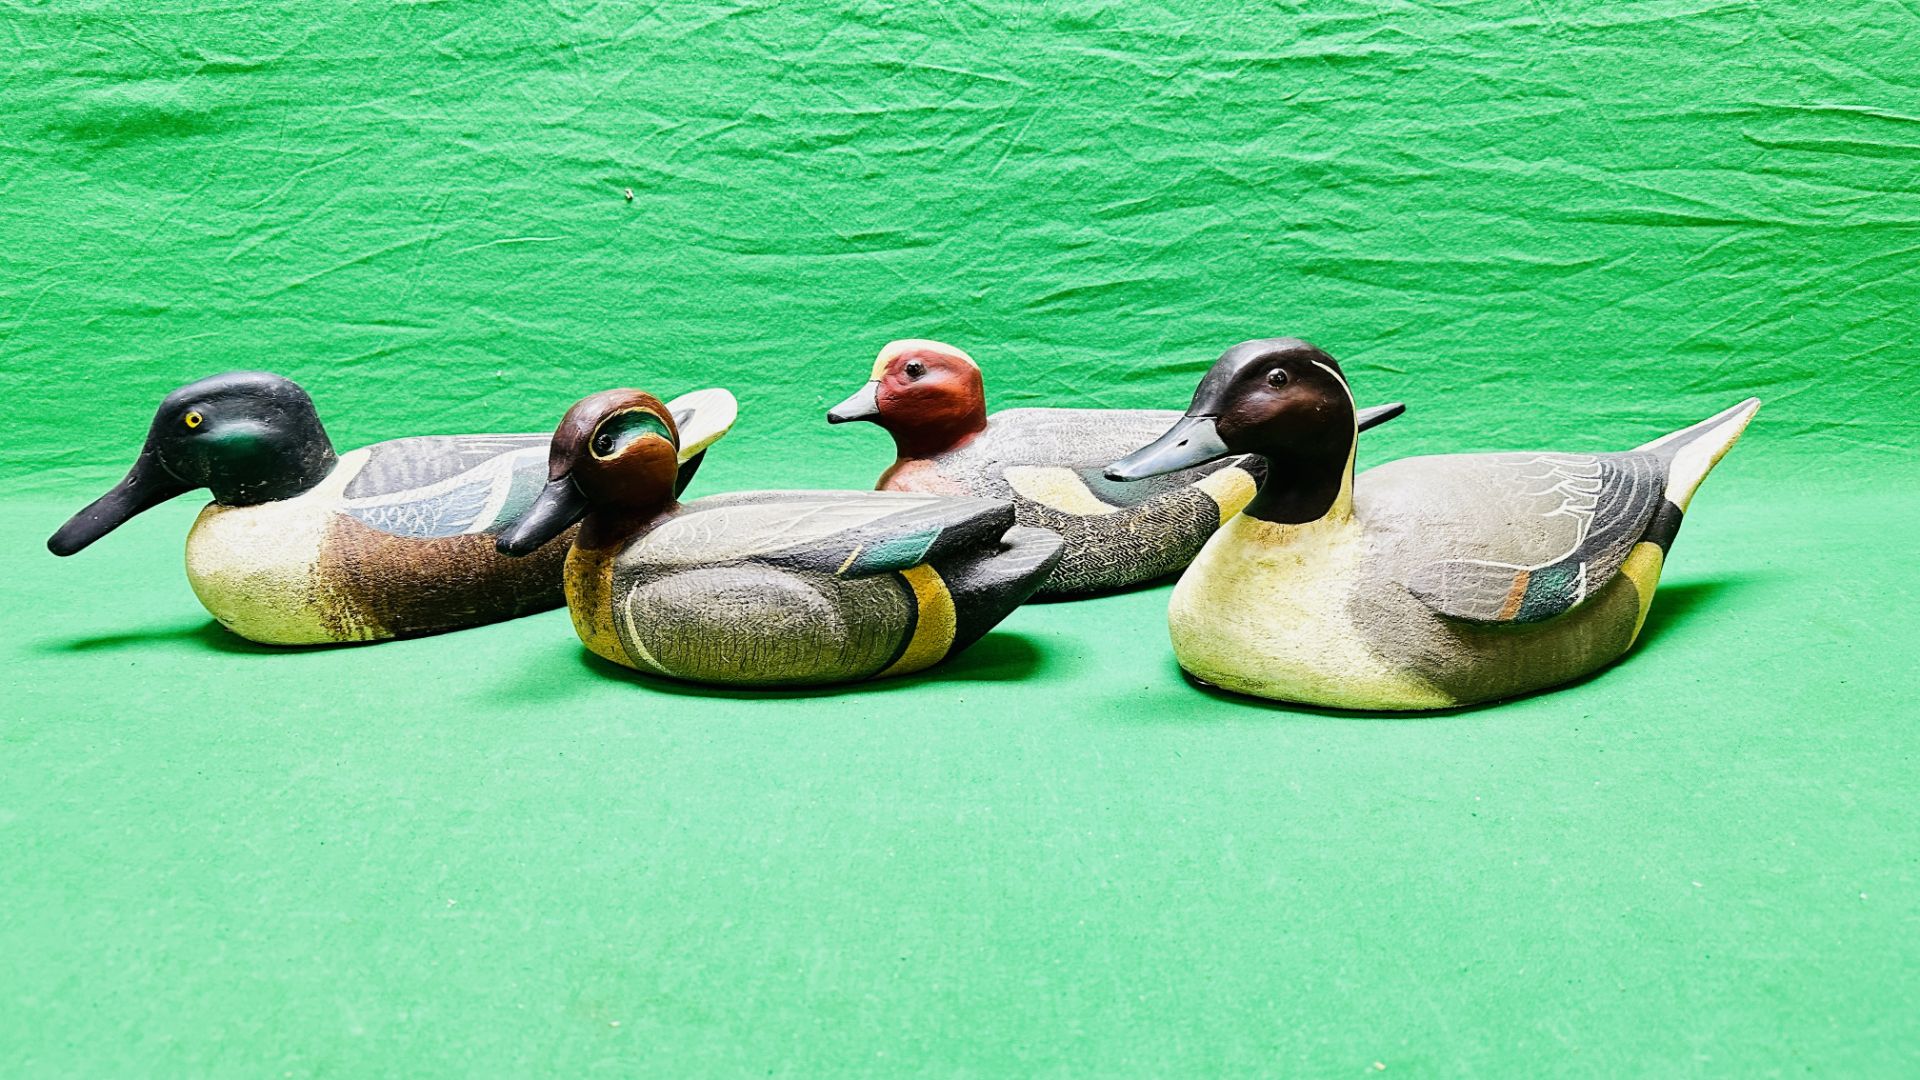 A HANDCRAFTED SET OF 4 DUCK DECOYS HAVING HANDPAINTED DETAIL AND GLASS EYES.